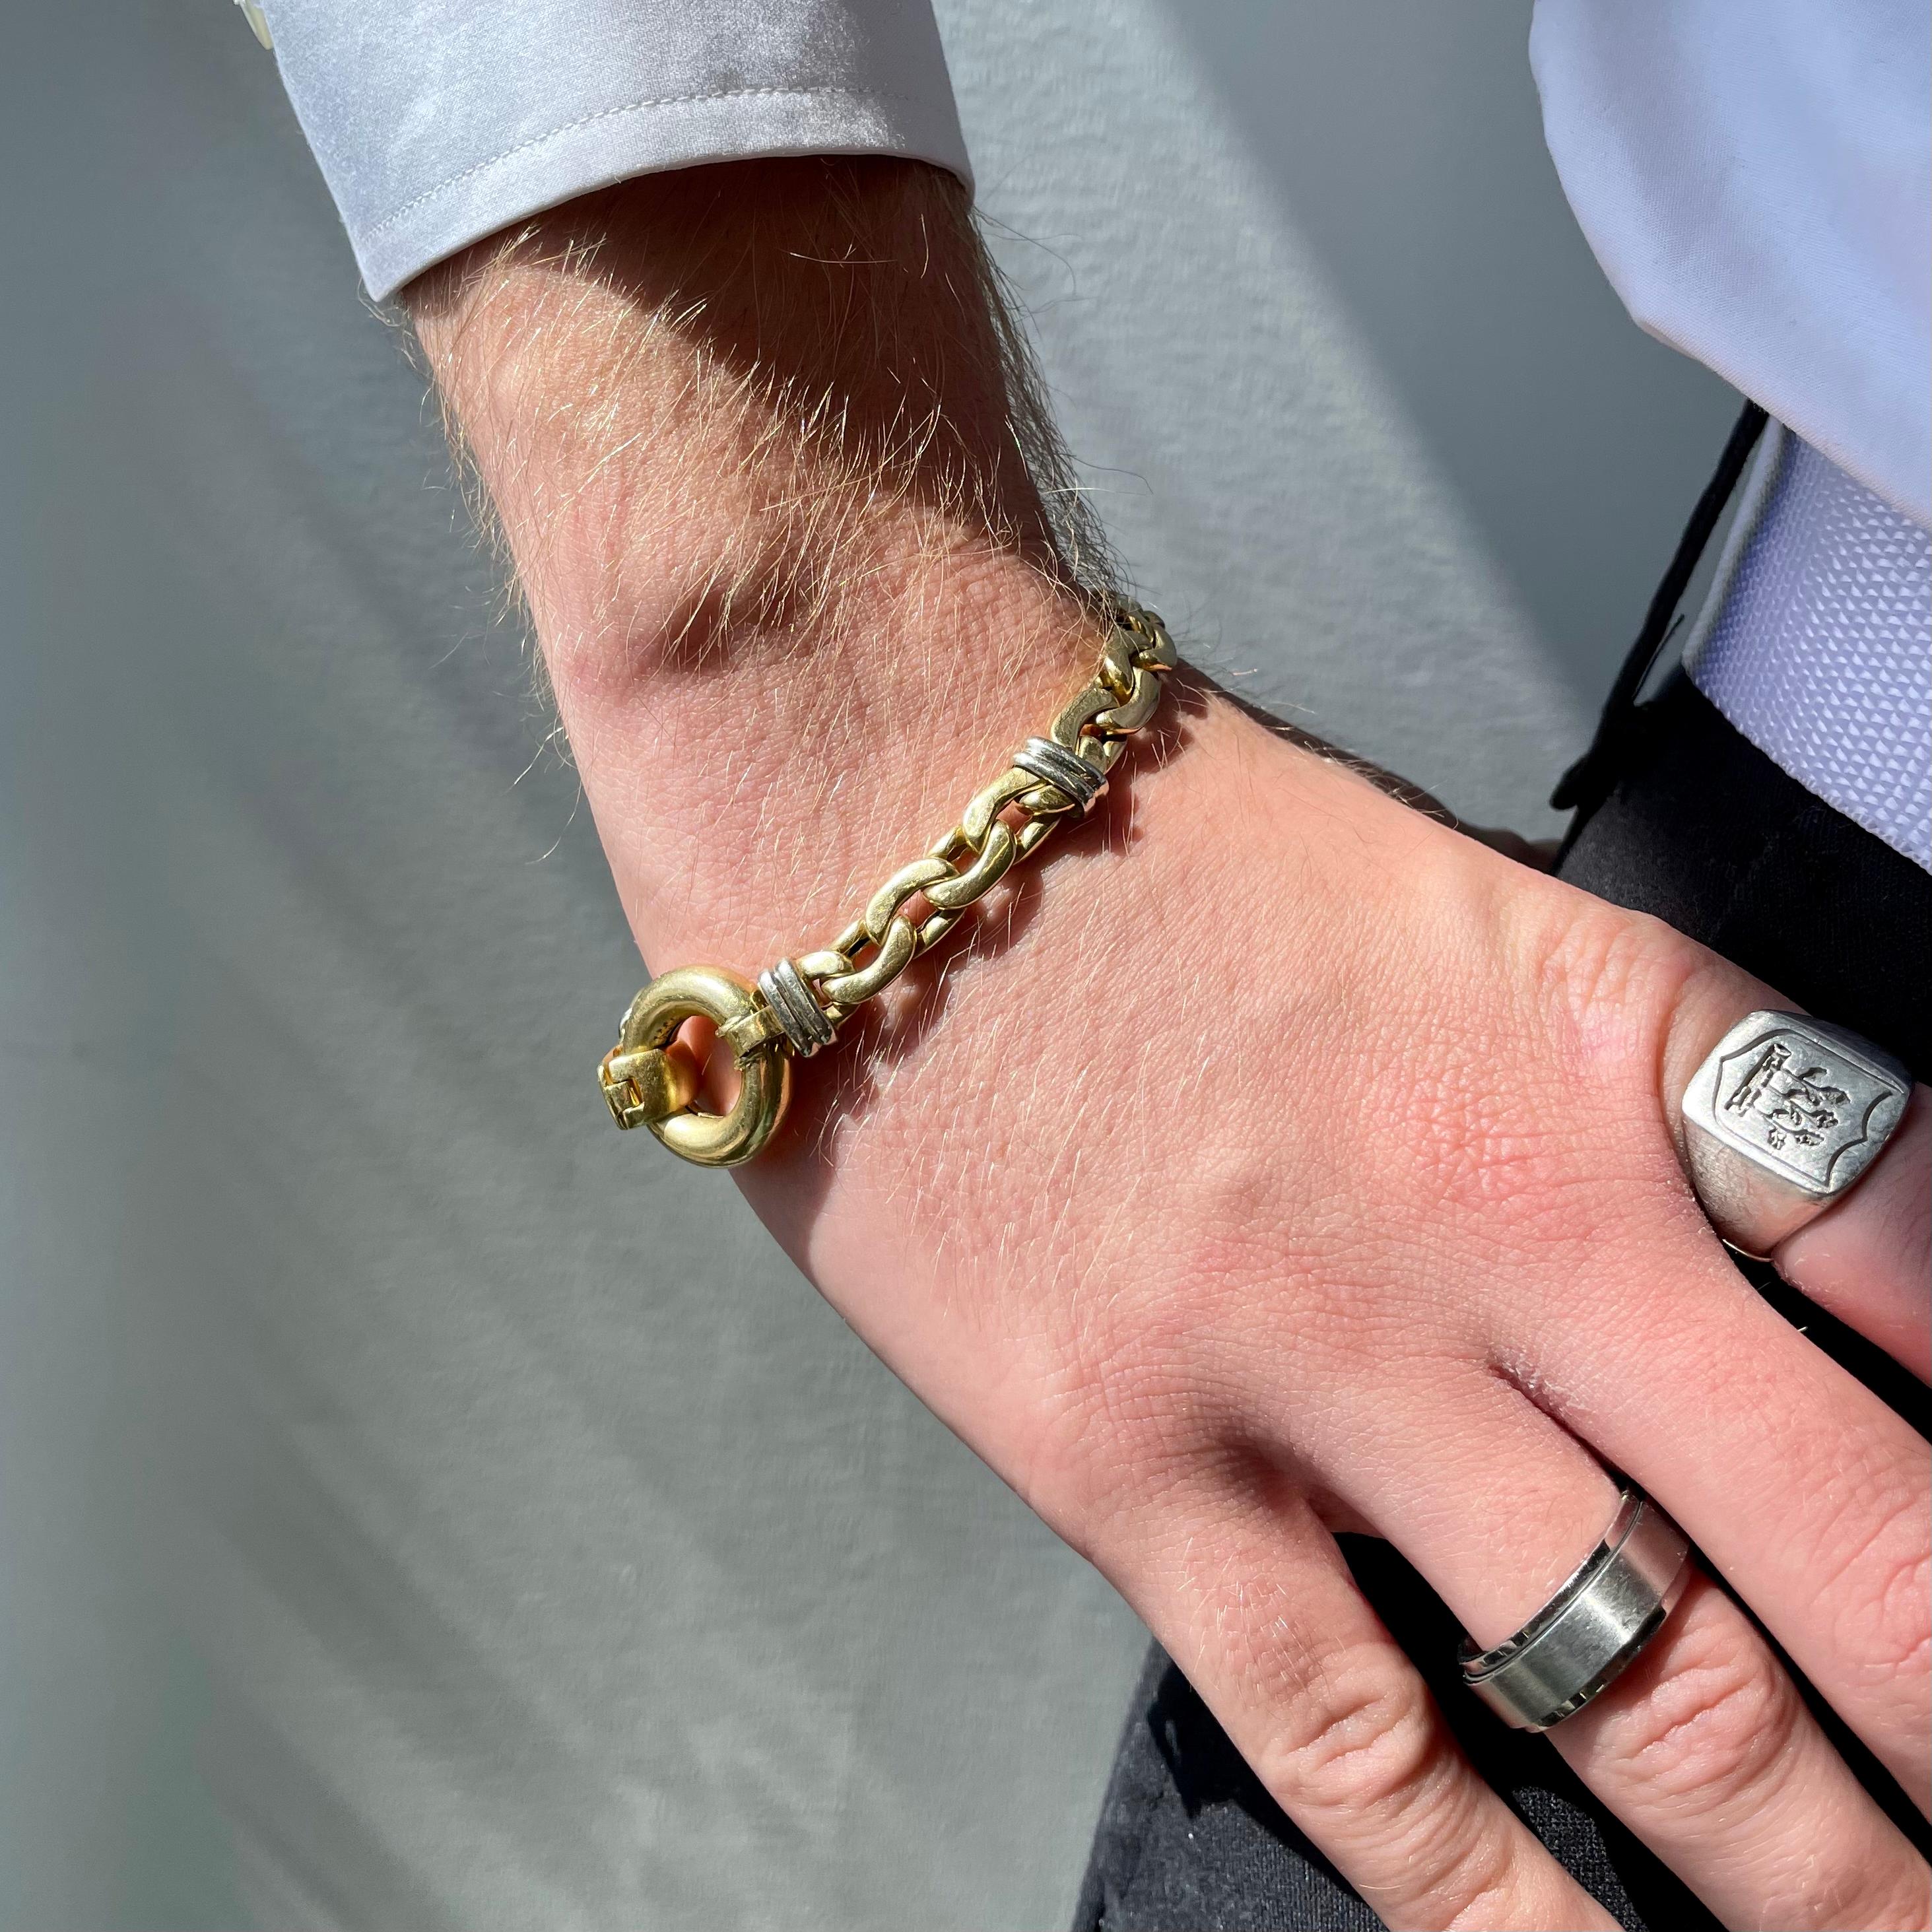 Vintage Italian 18 Karat Gold Bracelet. Italian hallmarks. Circa 1980’s. The length is  eight inches.

About The Piece: Substantial, bold solid gold links are the hottest trend of 2021. Wear this bracelet with an all-black outfit for a dramatic